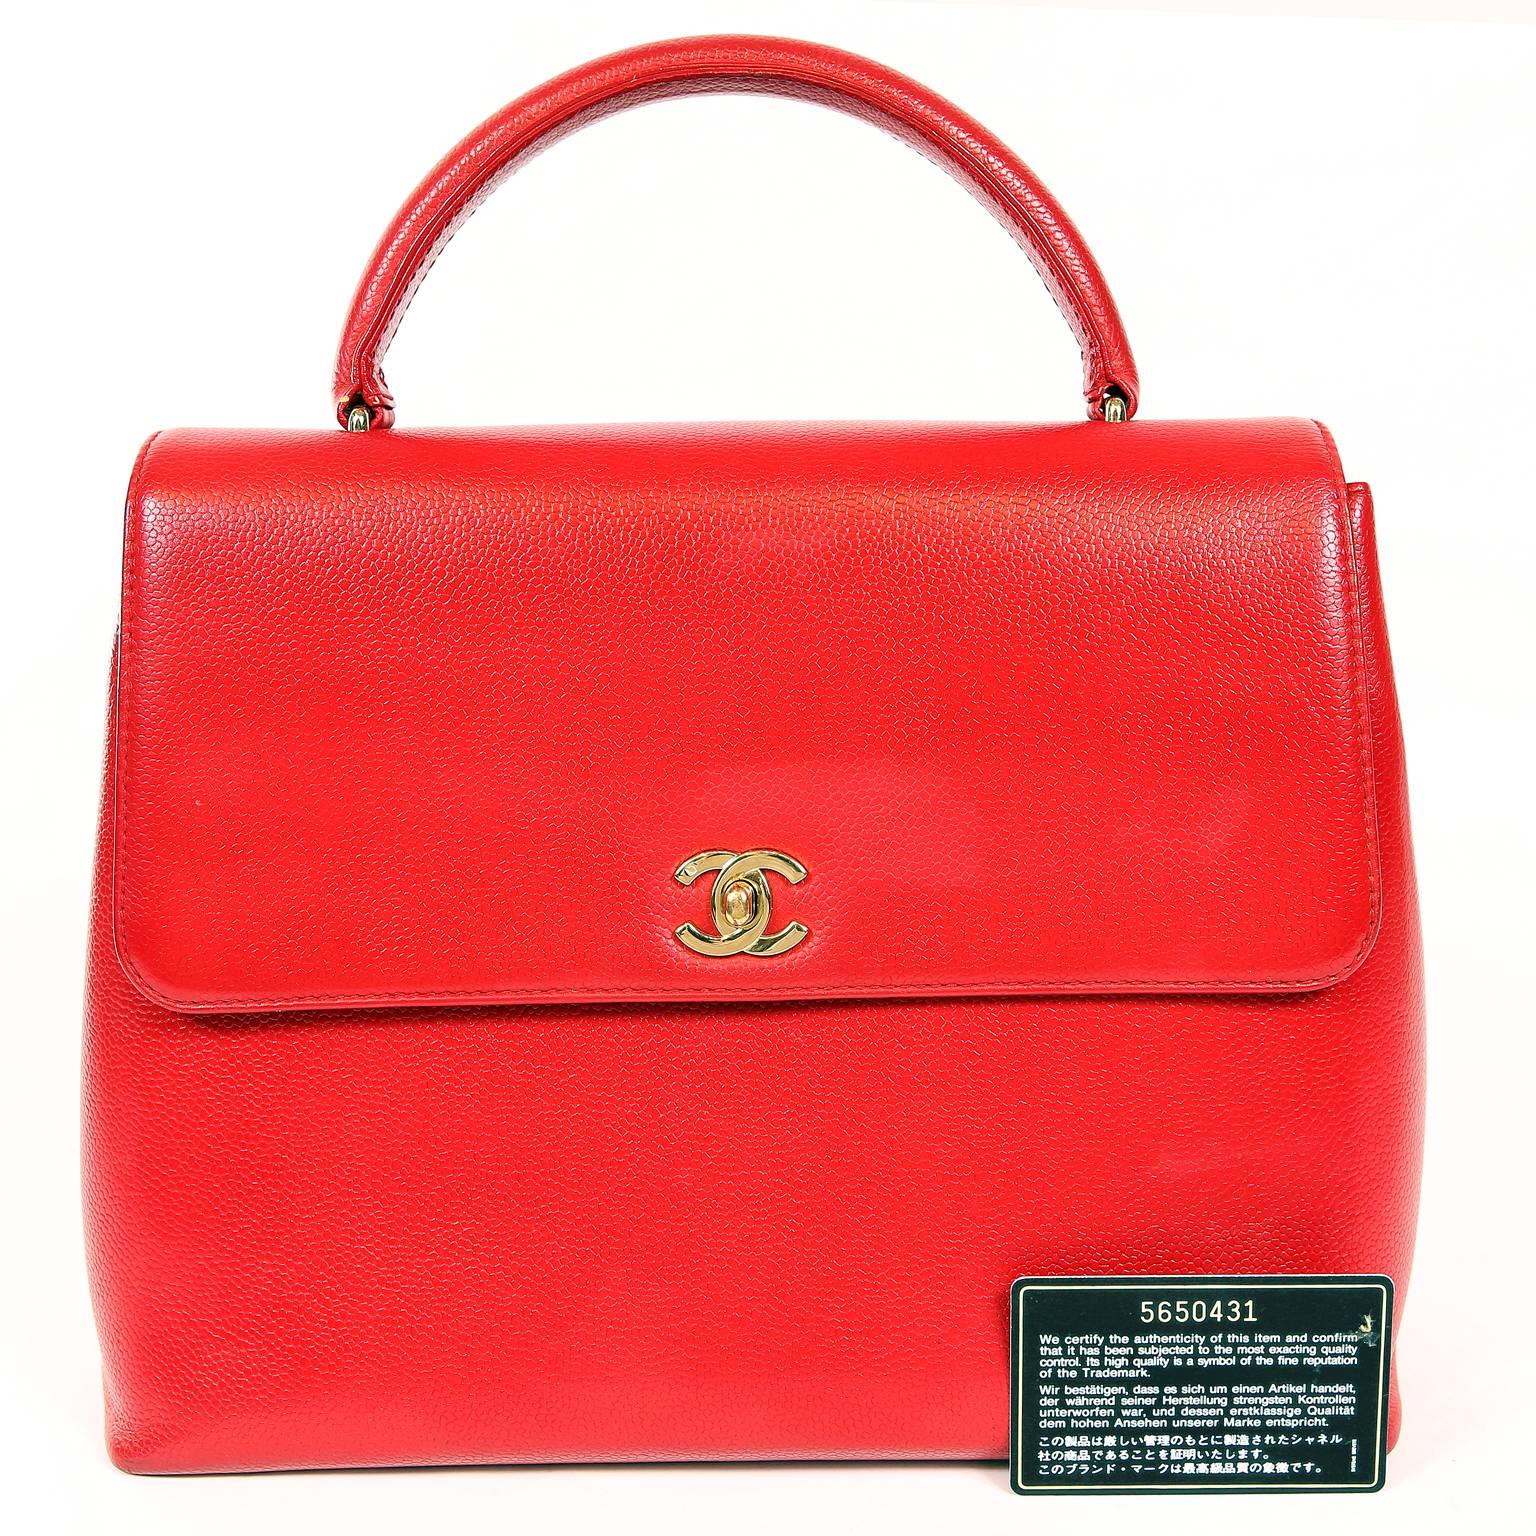 Chanel Red Caviar Leather Kelly Bag 6